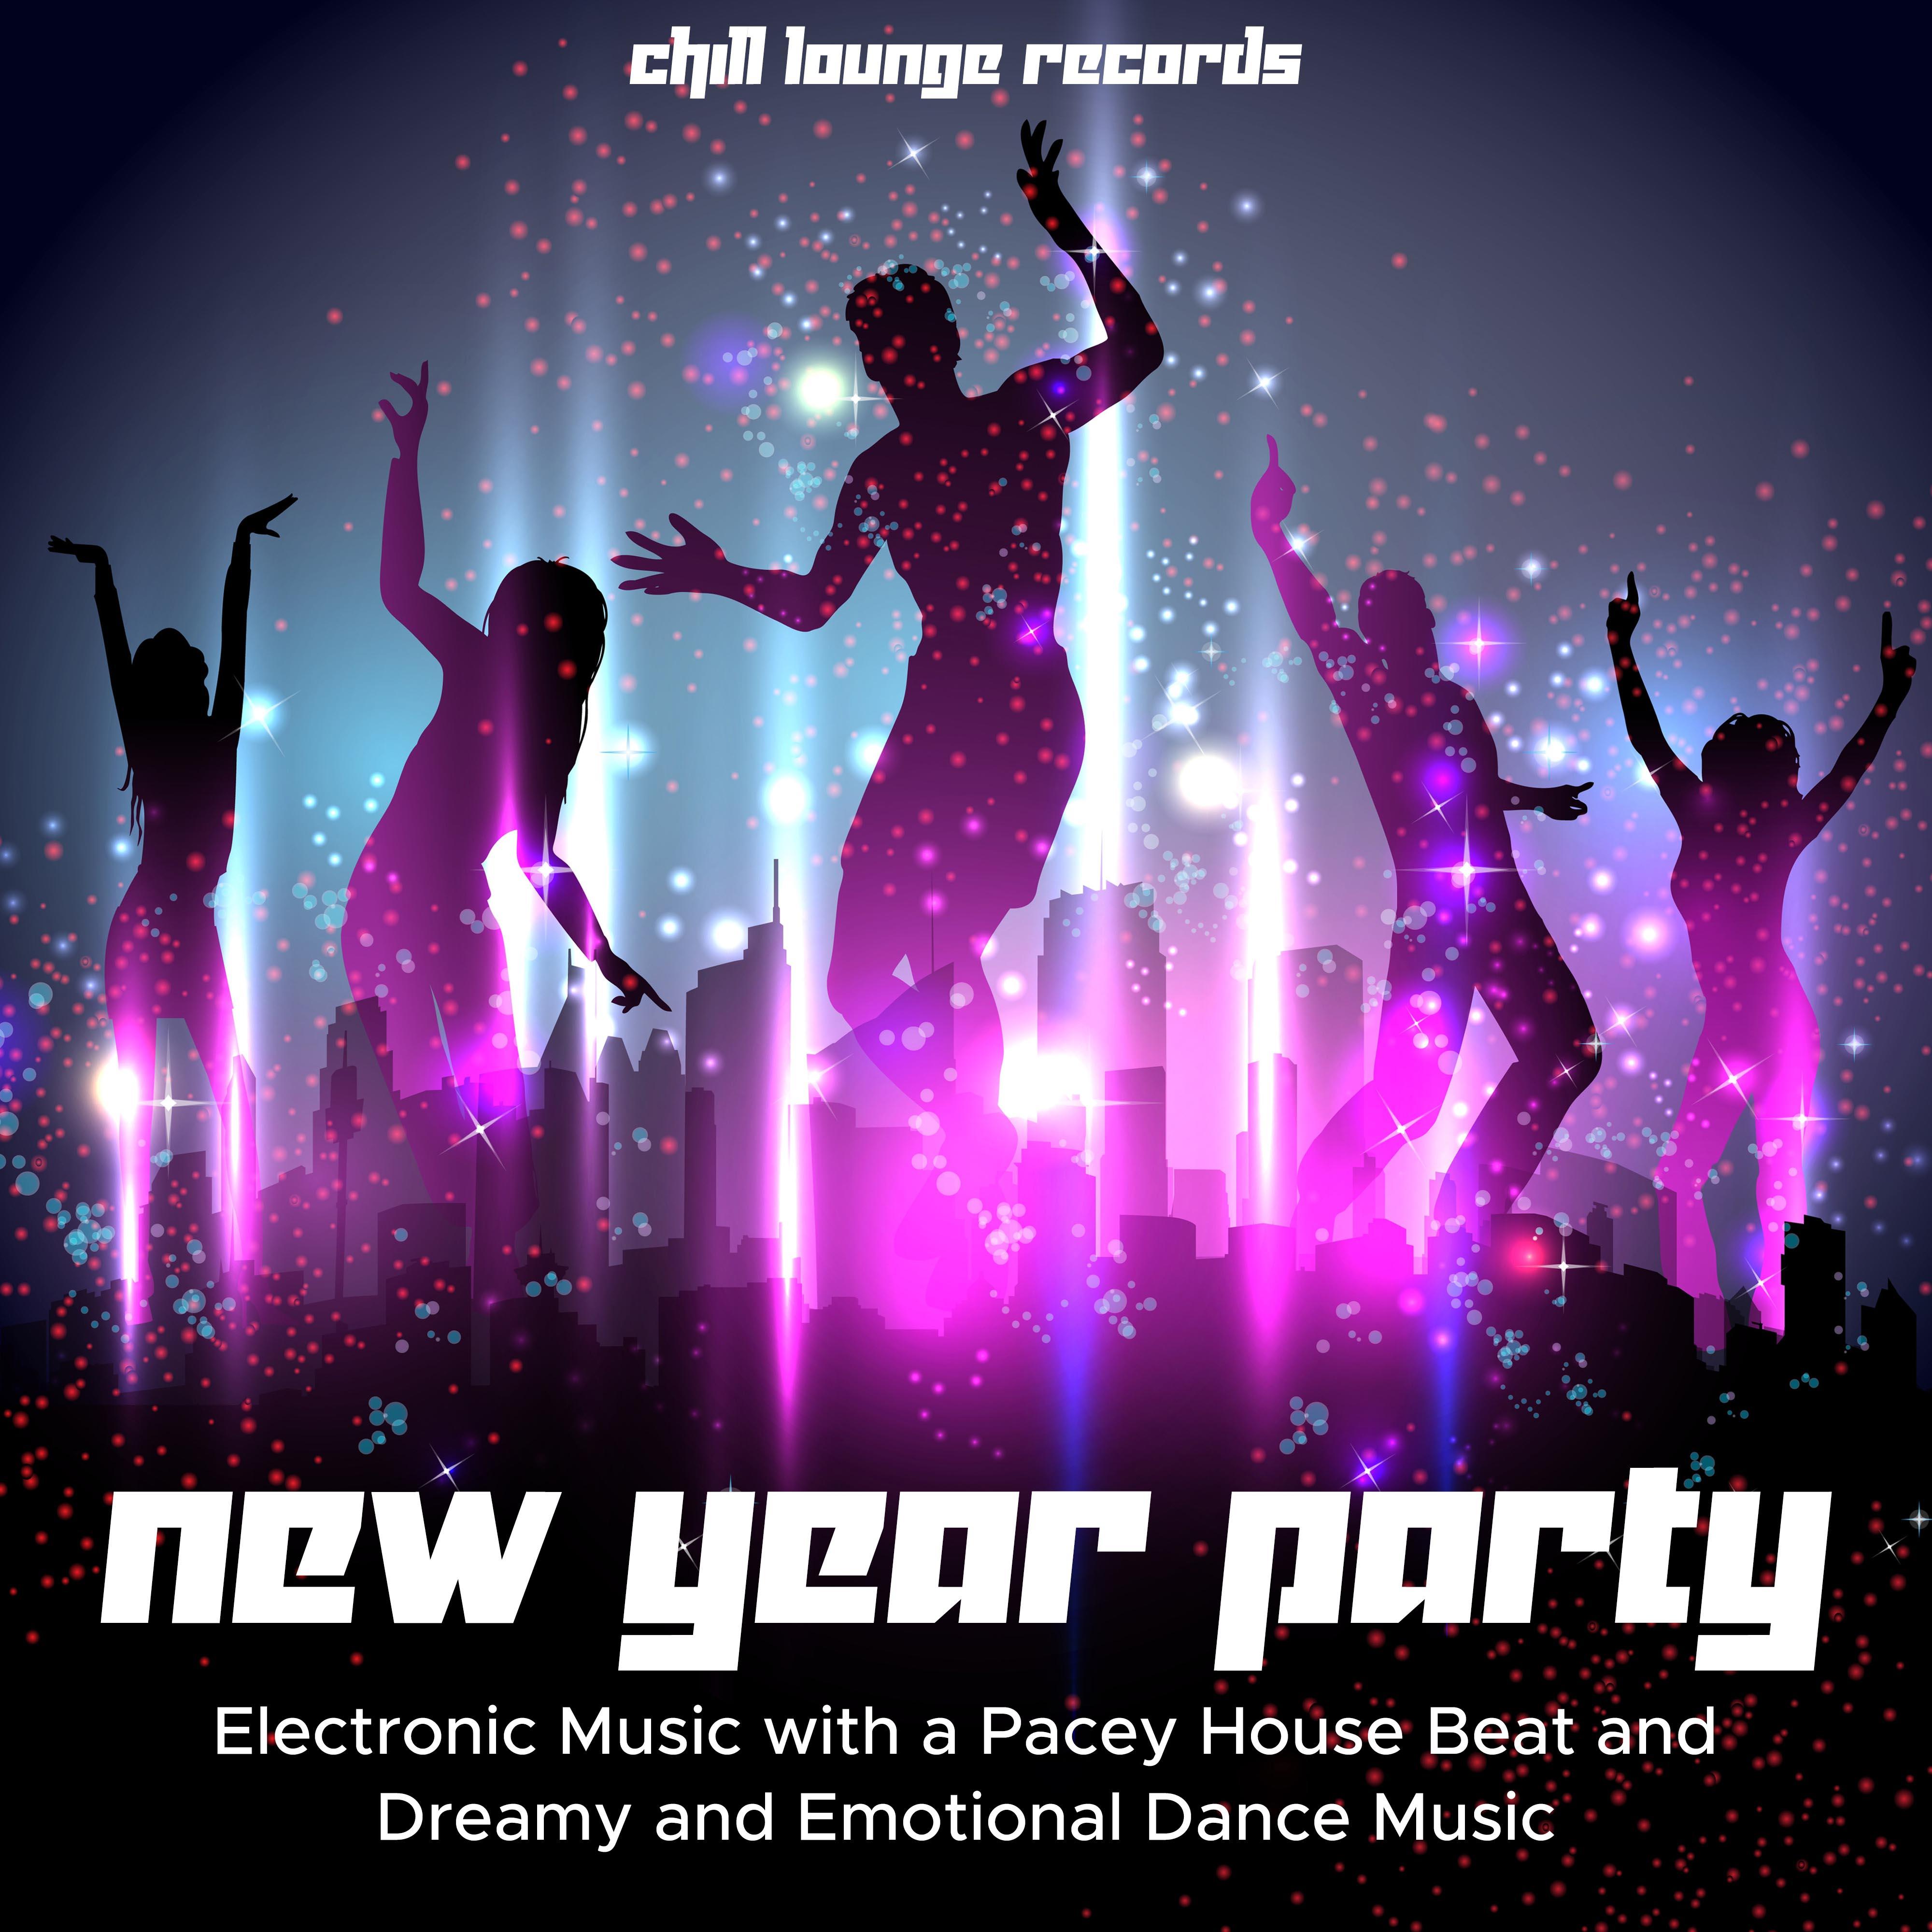 New Year Party - Electronic Music with a Pacey House Beat and Dreamy and Emotional Dance Music